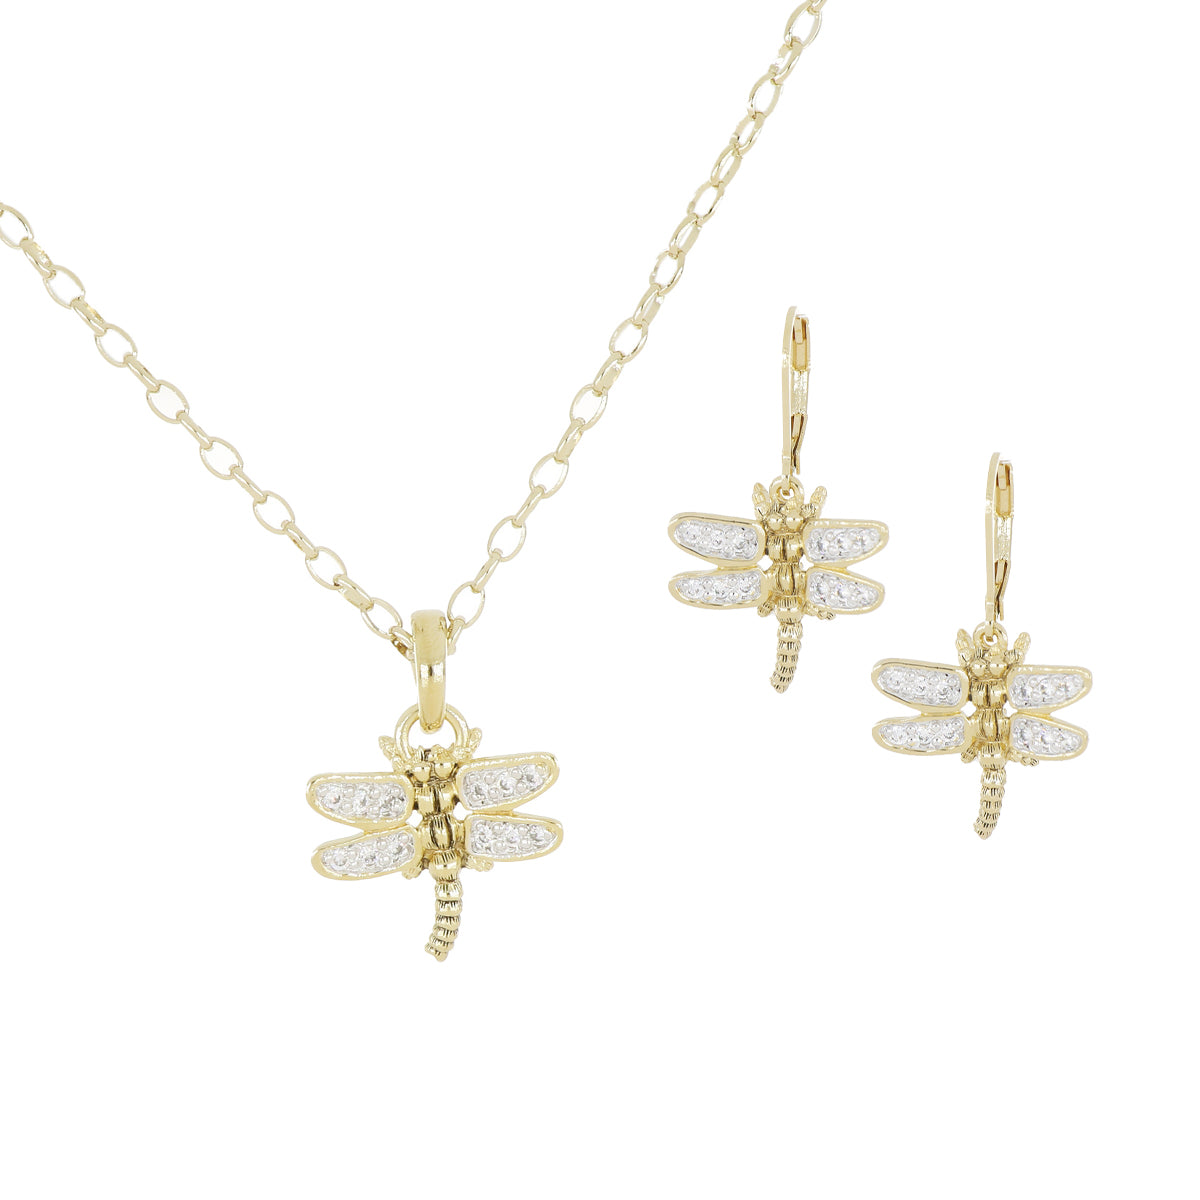 20th Anniversary Dragonfly Pendant & Earring Gift Set